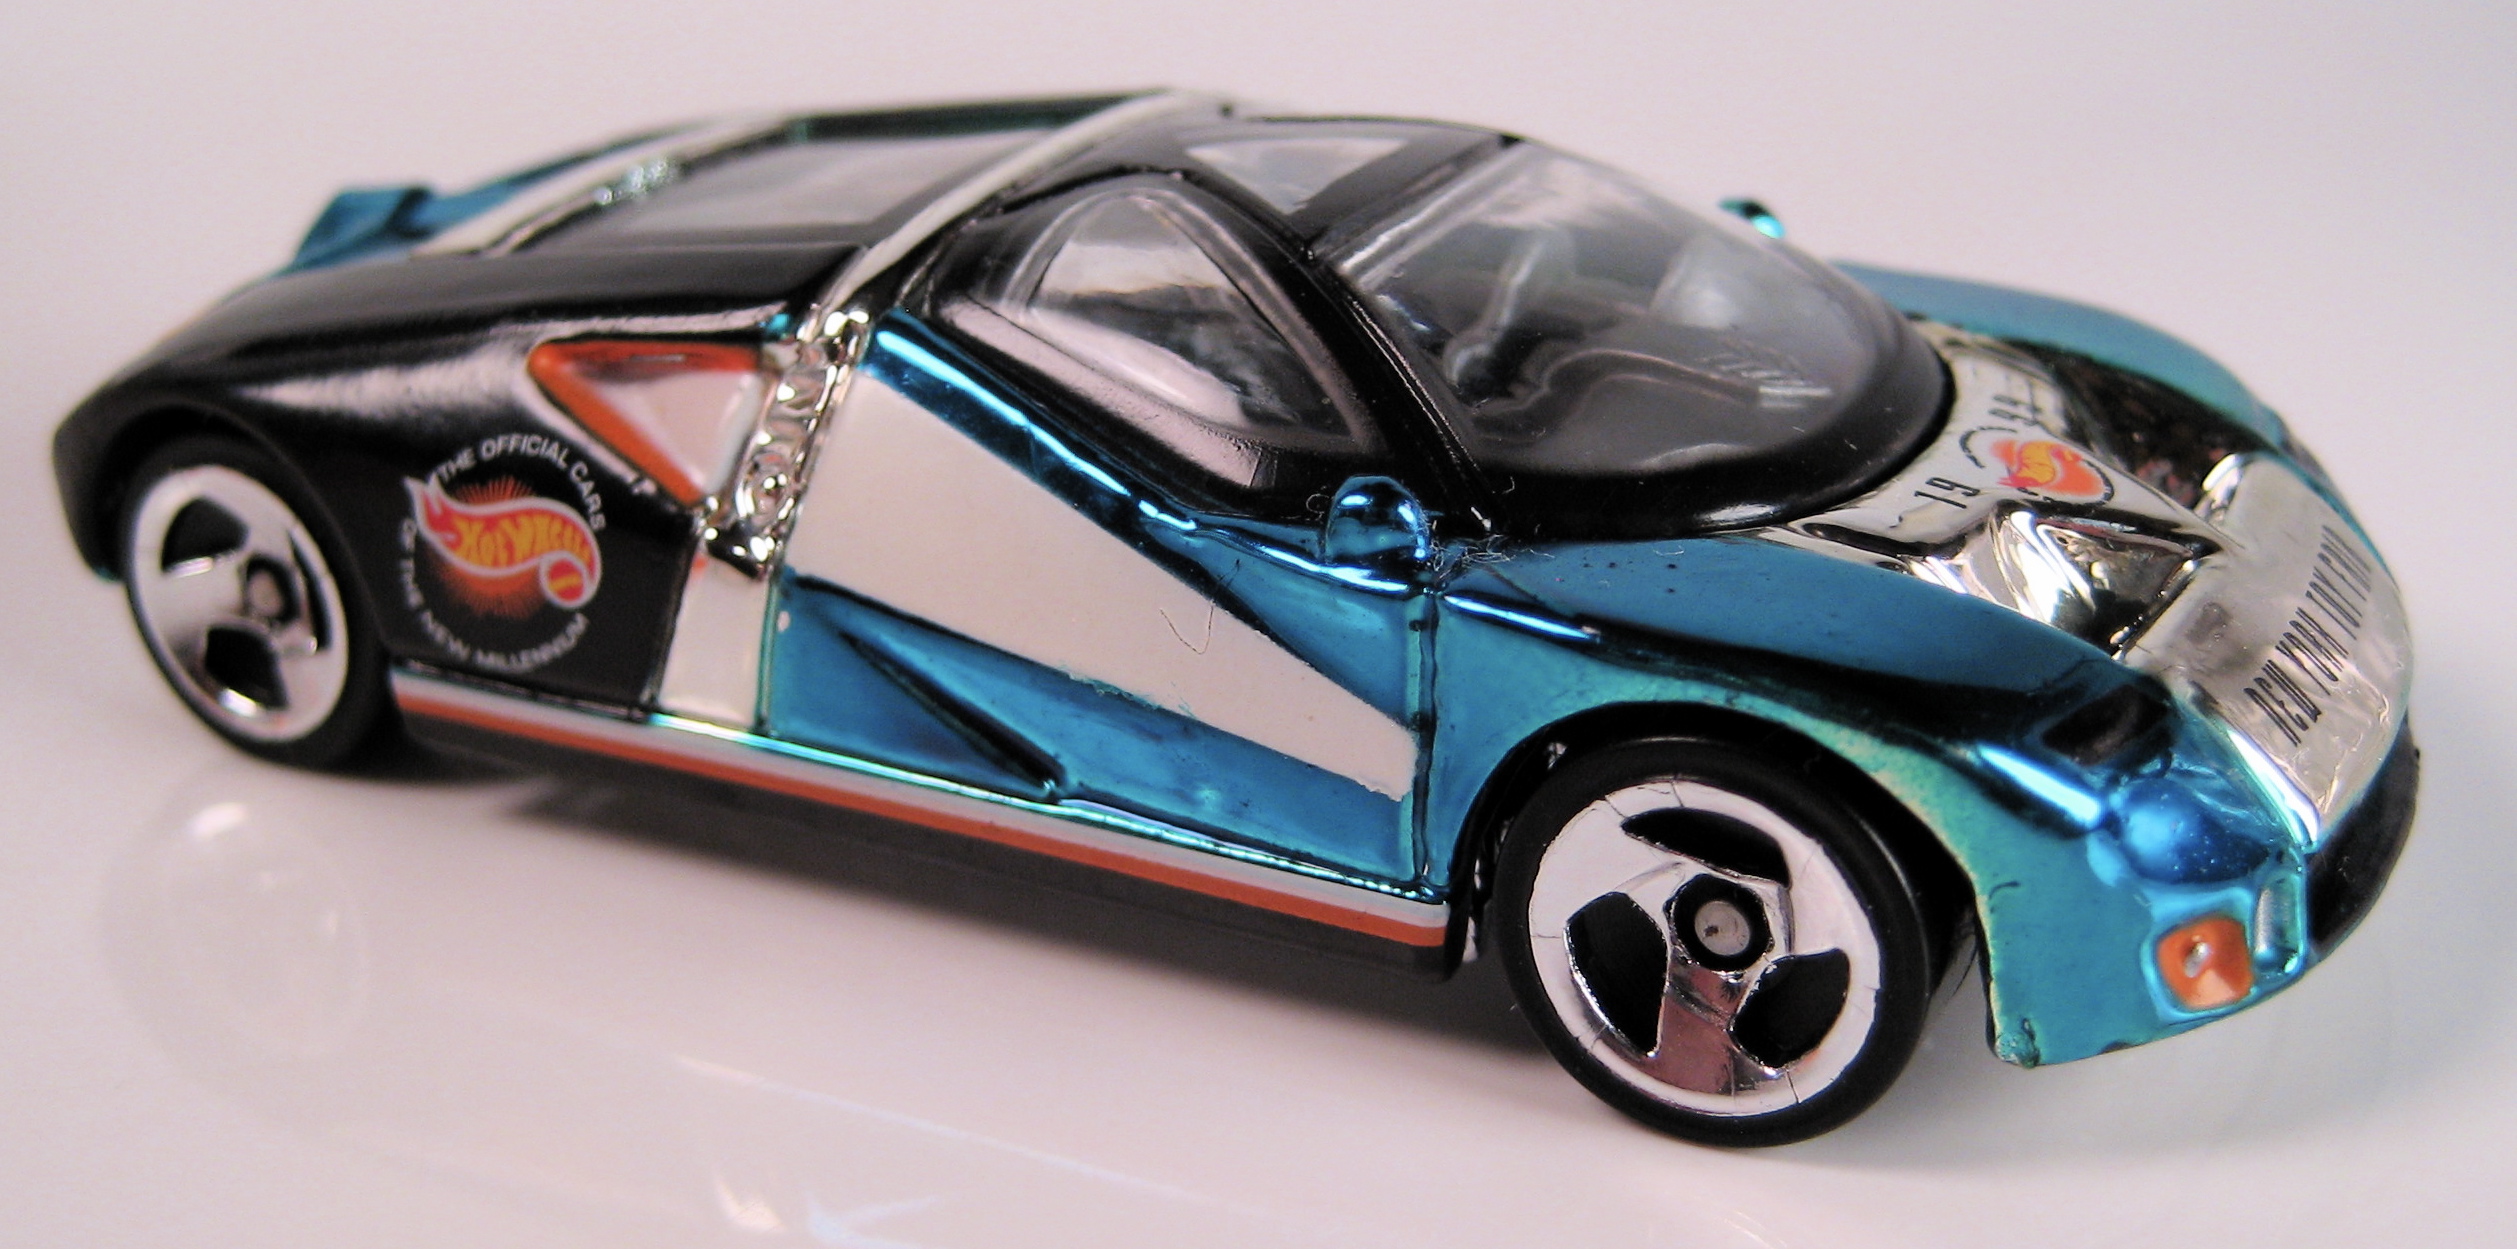 hot wheels 1997 ford gt90